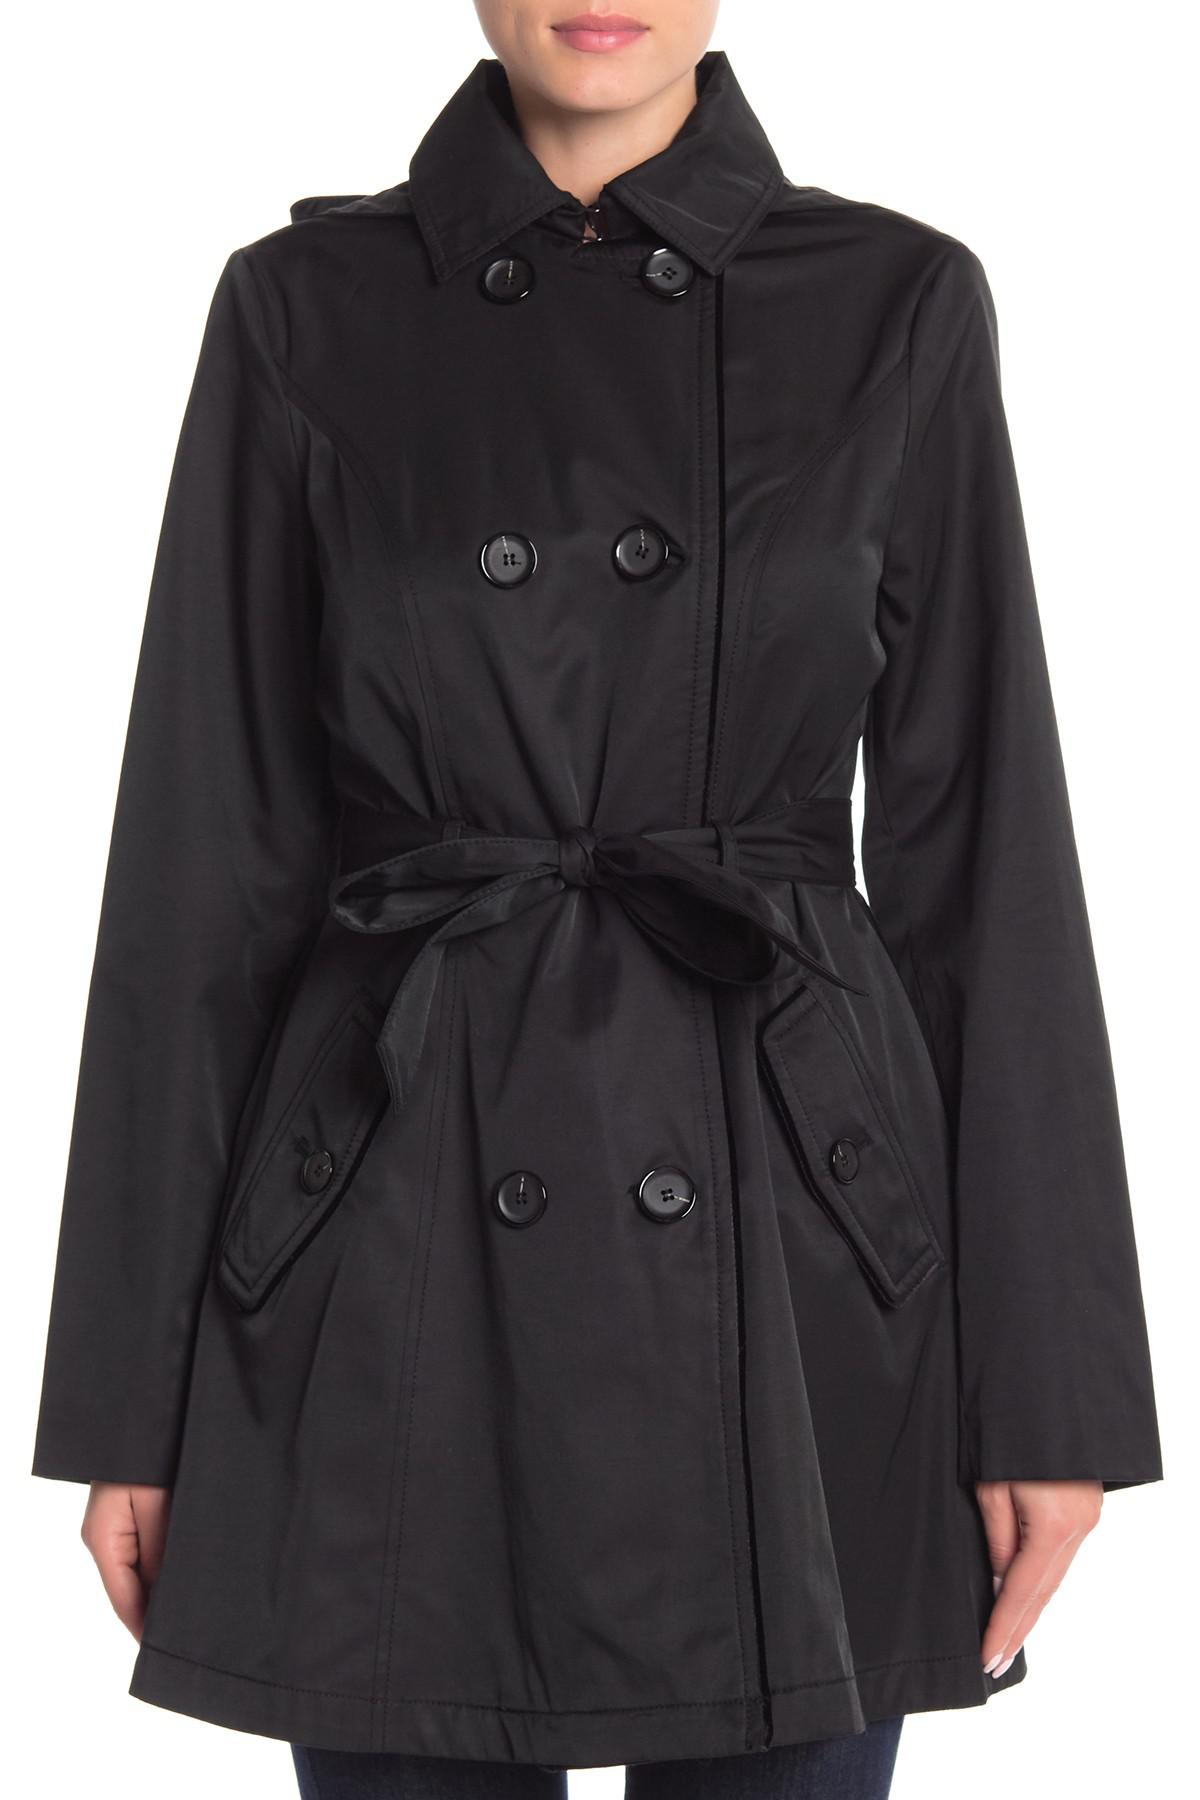 Laundry by Shelli Segal Cotton Double Breasted Trench Coat in Black - Lyst